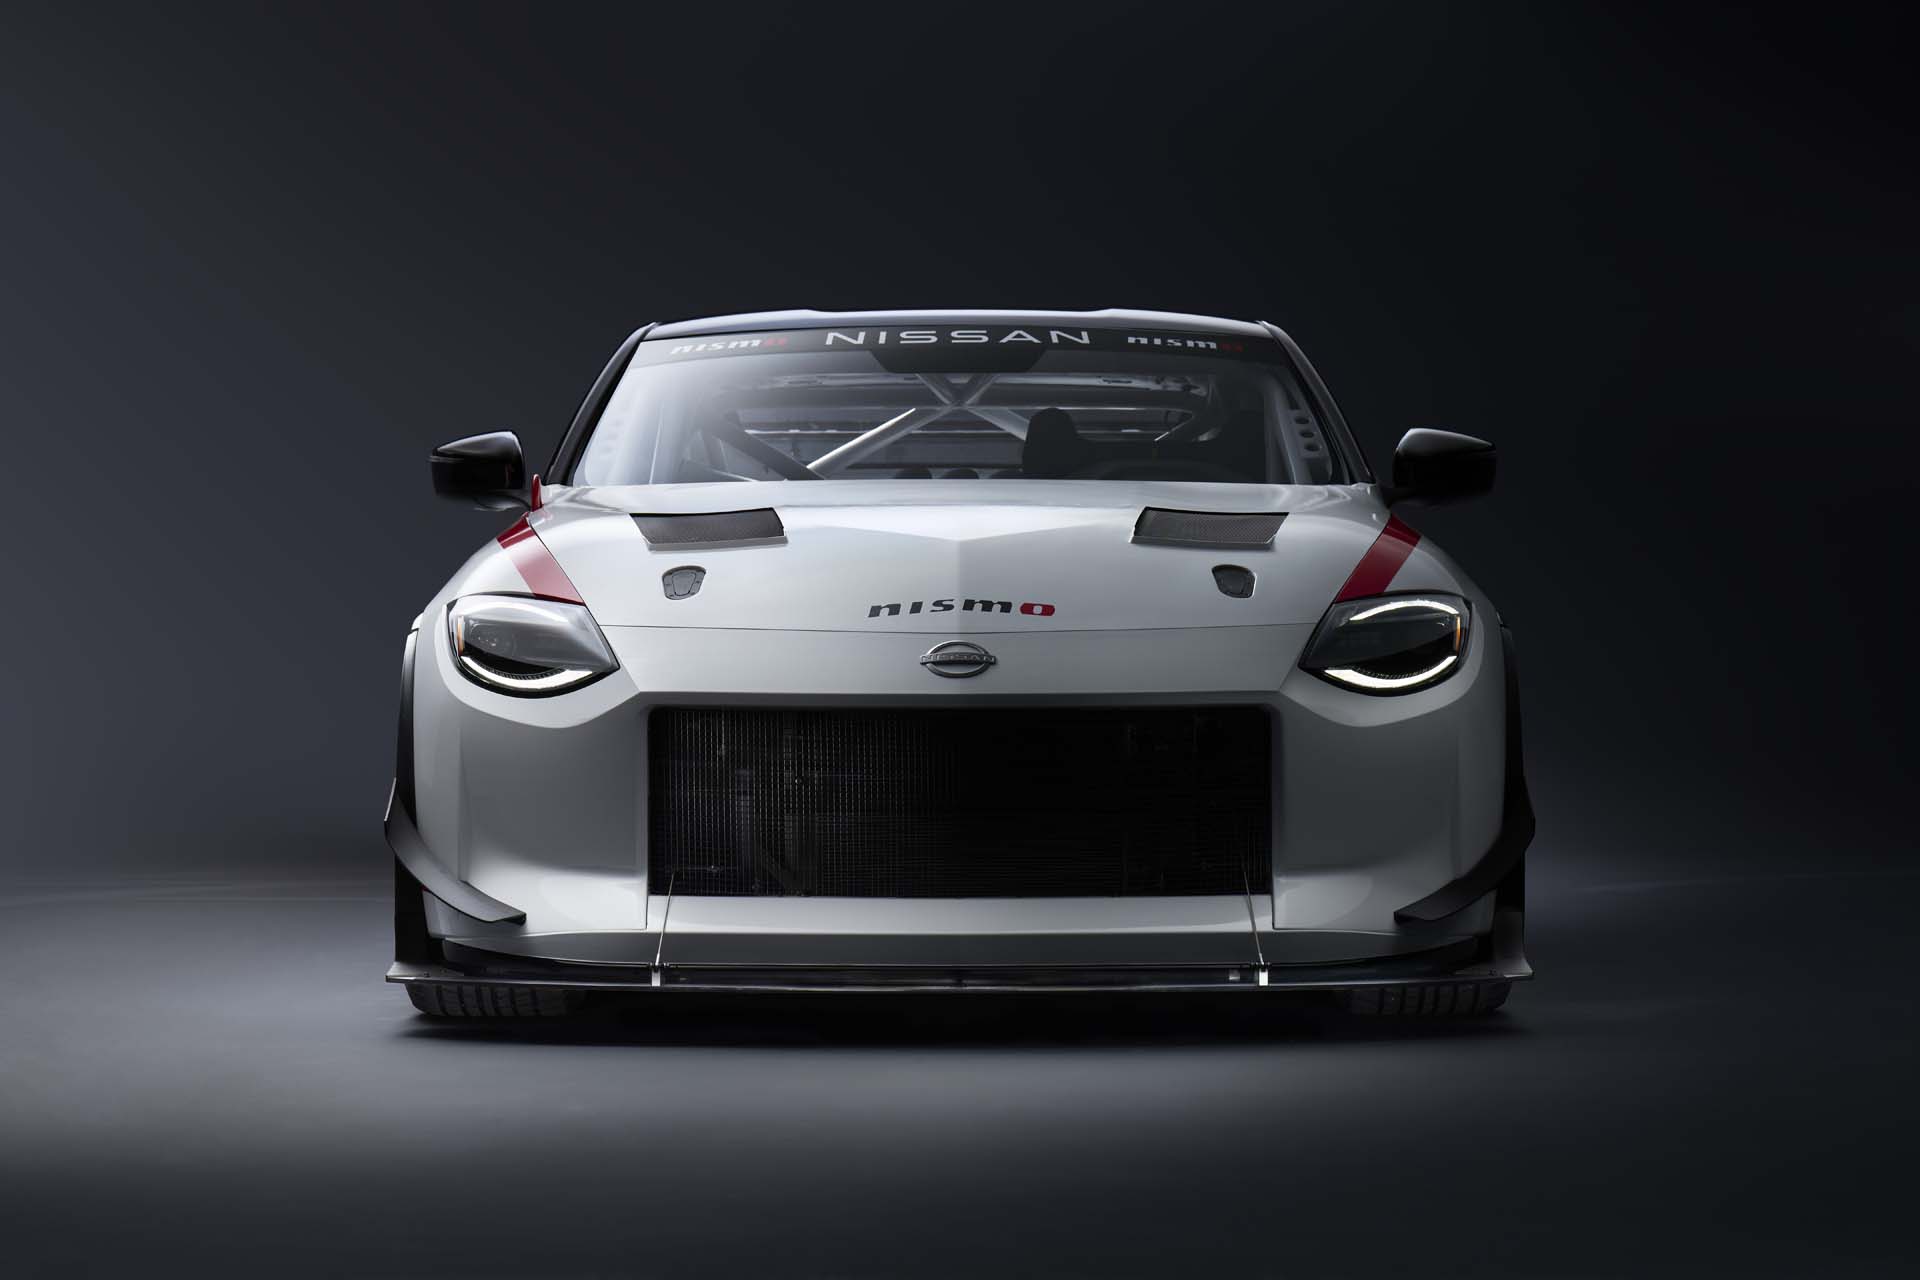 Nissan Z GT4 race car revealed, full details to come at SEMA